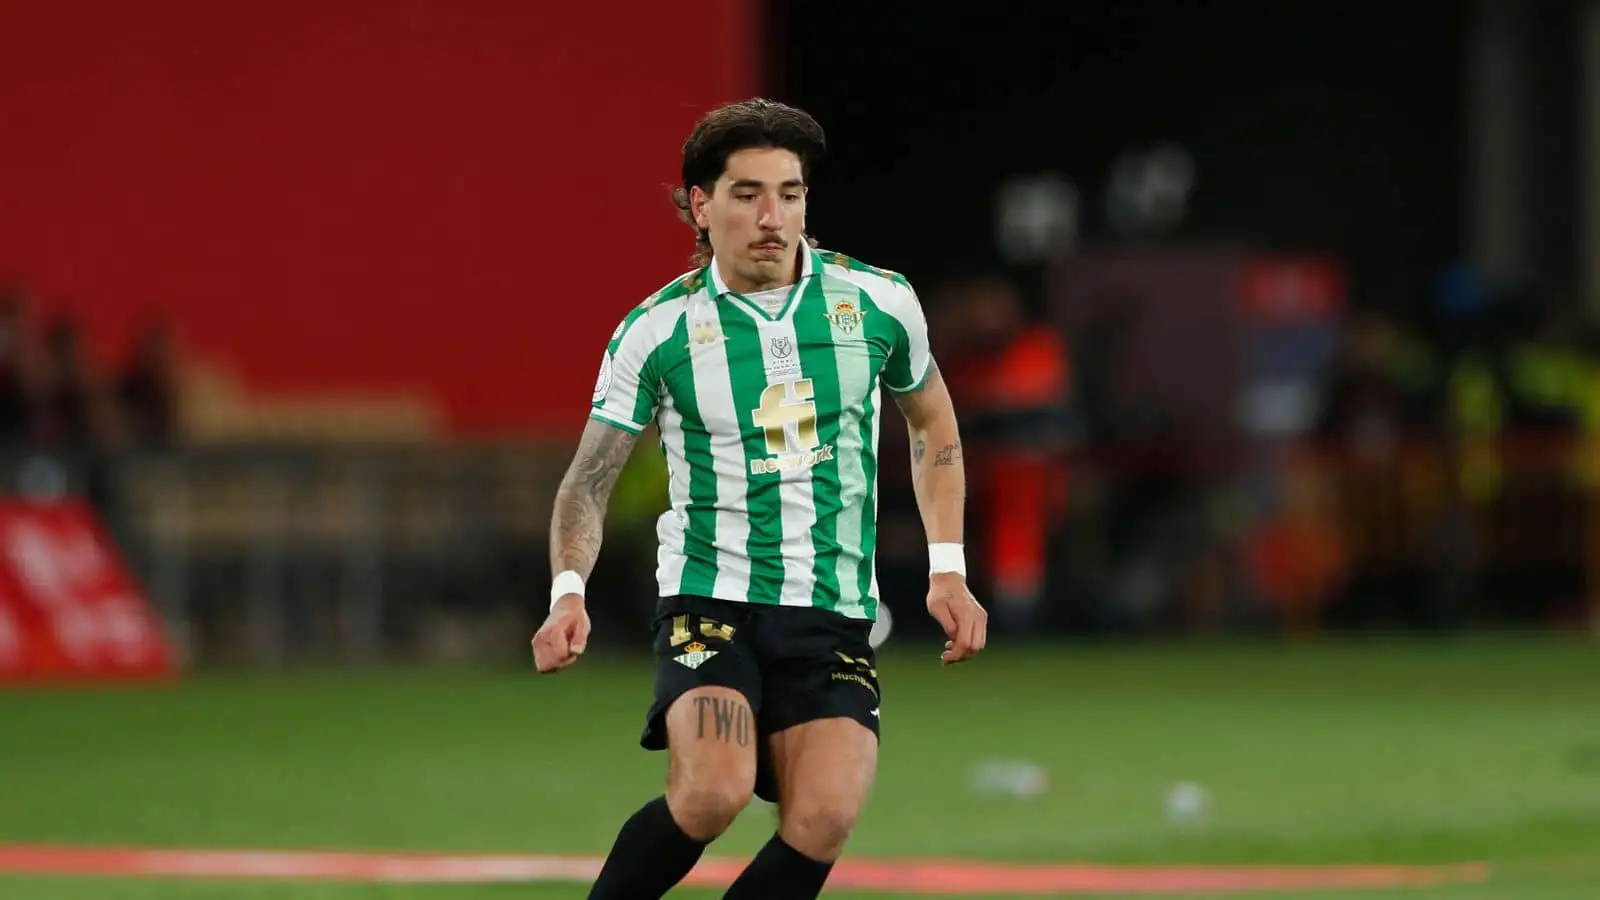 Barcelona news: Hector Bellerin will join from Arsenal - pundit